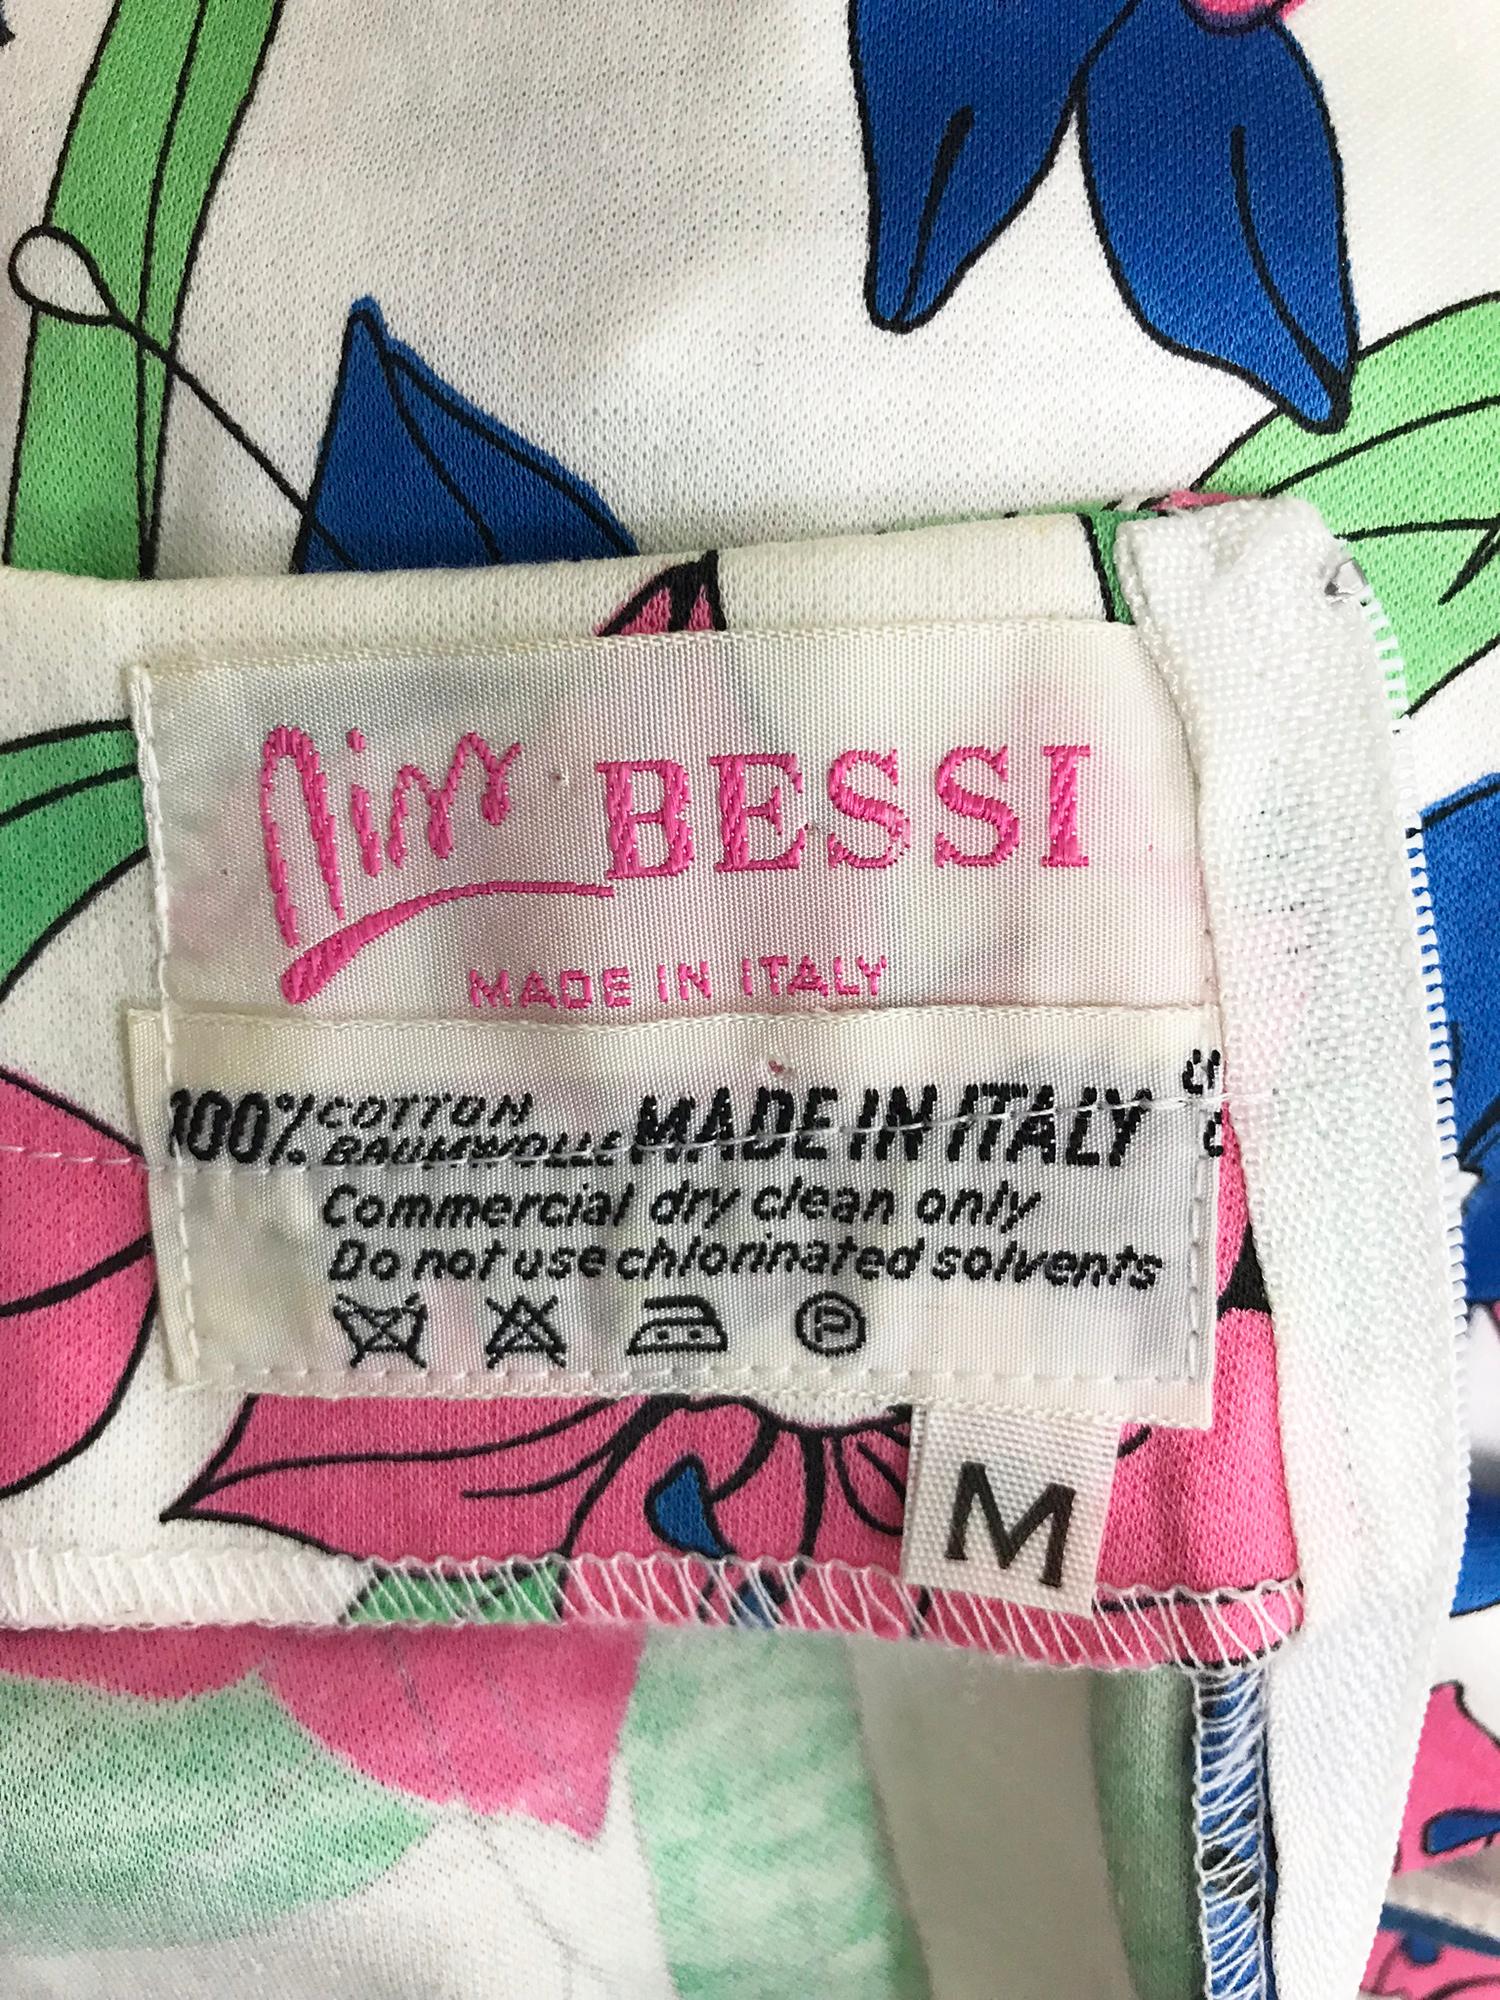 Miss Bessi Floral Fine Cotton Lisle Knit Day Dress 1990s For Sale 6